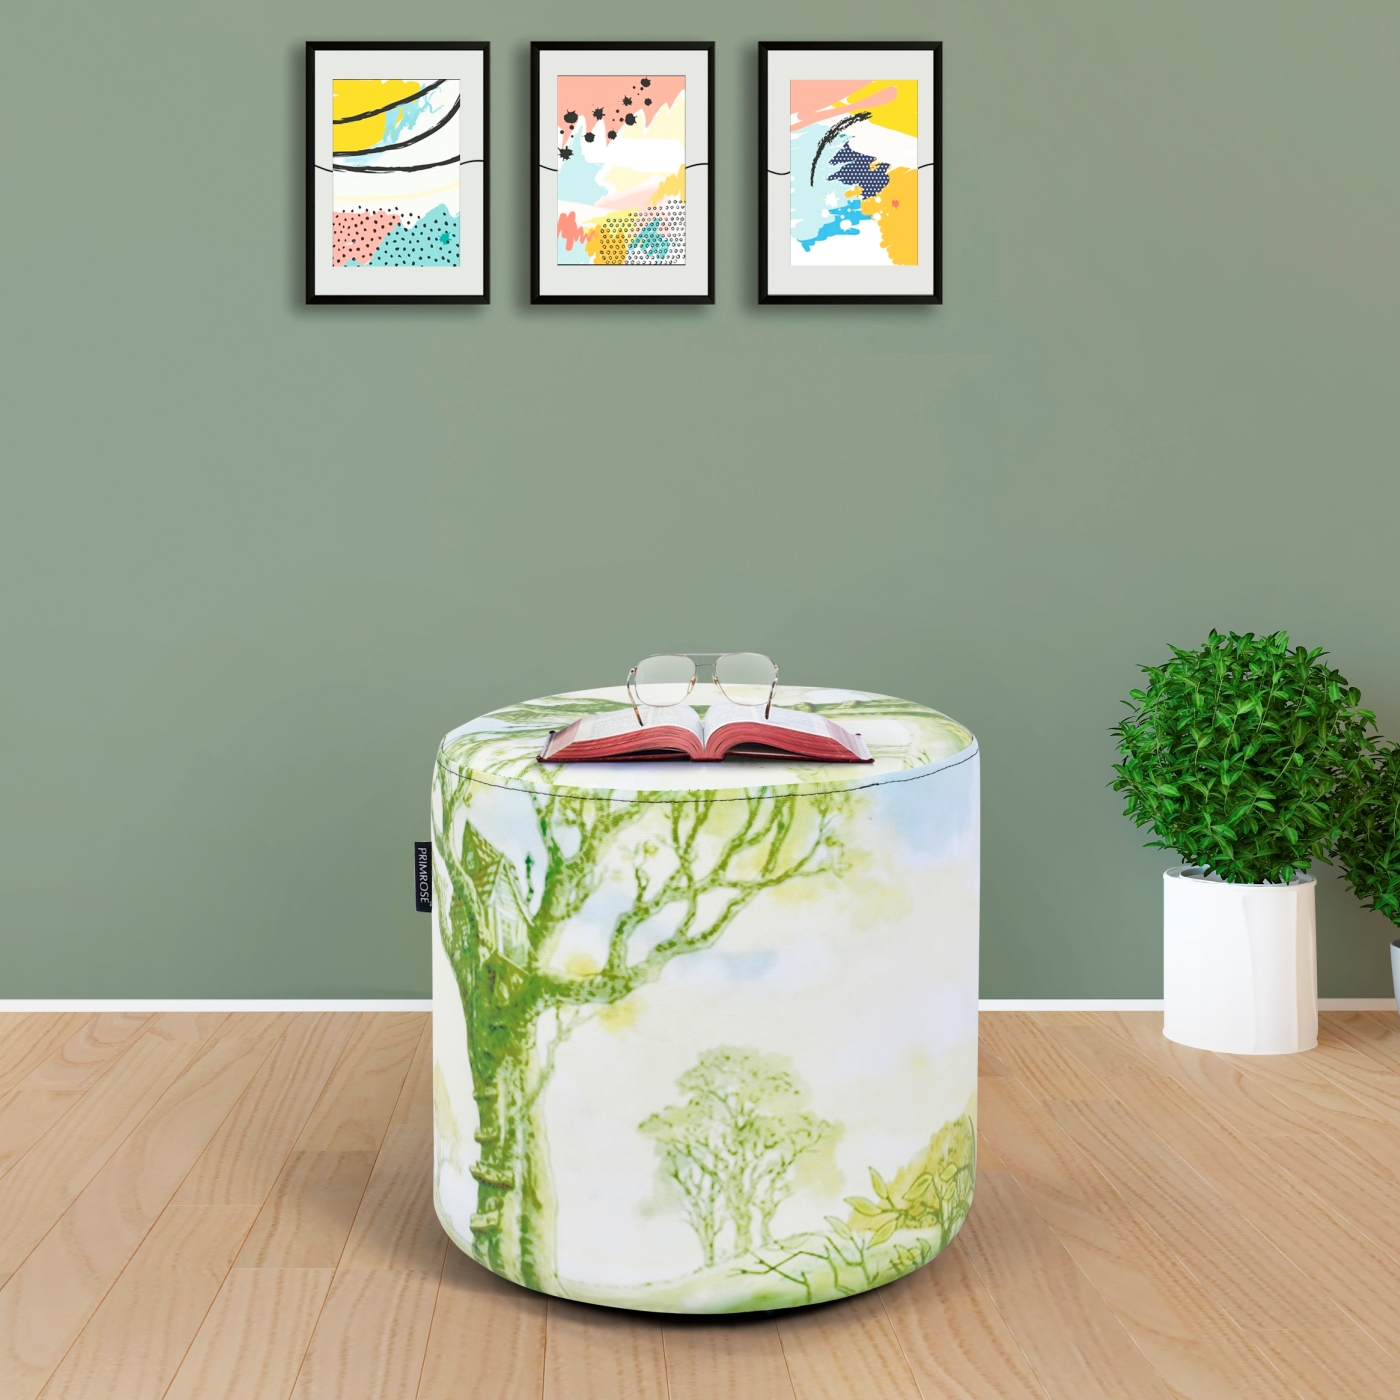 PRIMROSE Cottage Forest Digital Printed Art Leather Ottoman 16.5 X 16.5 Inch - Green, White  